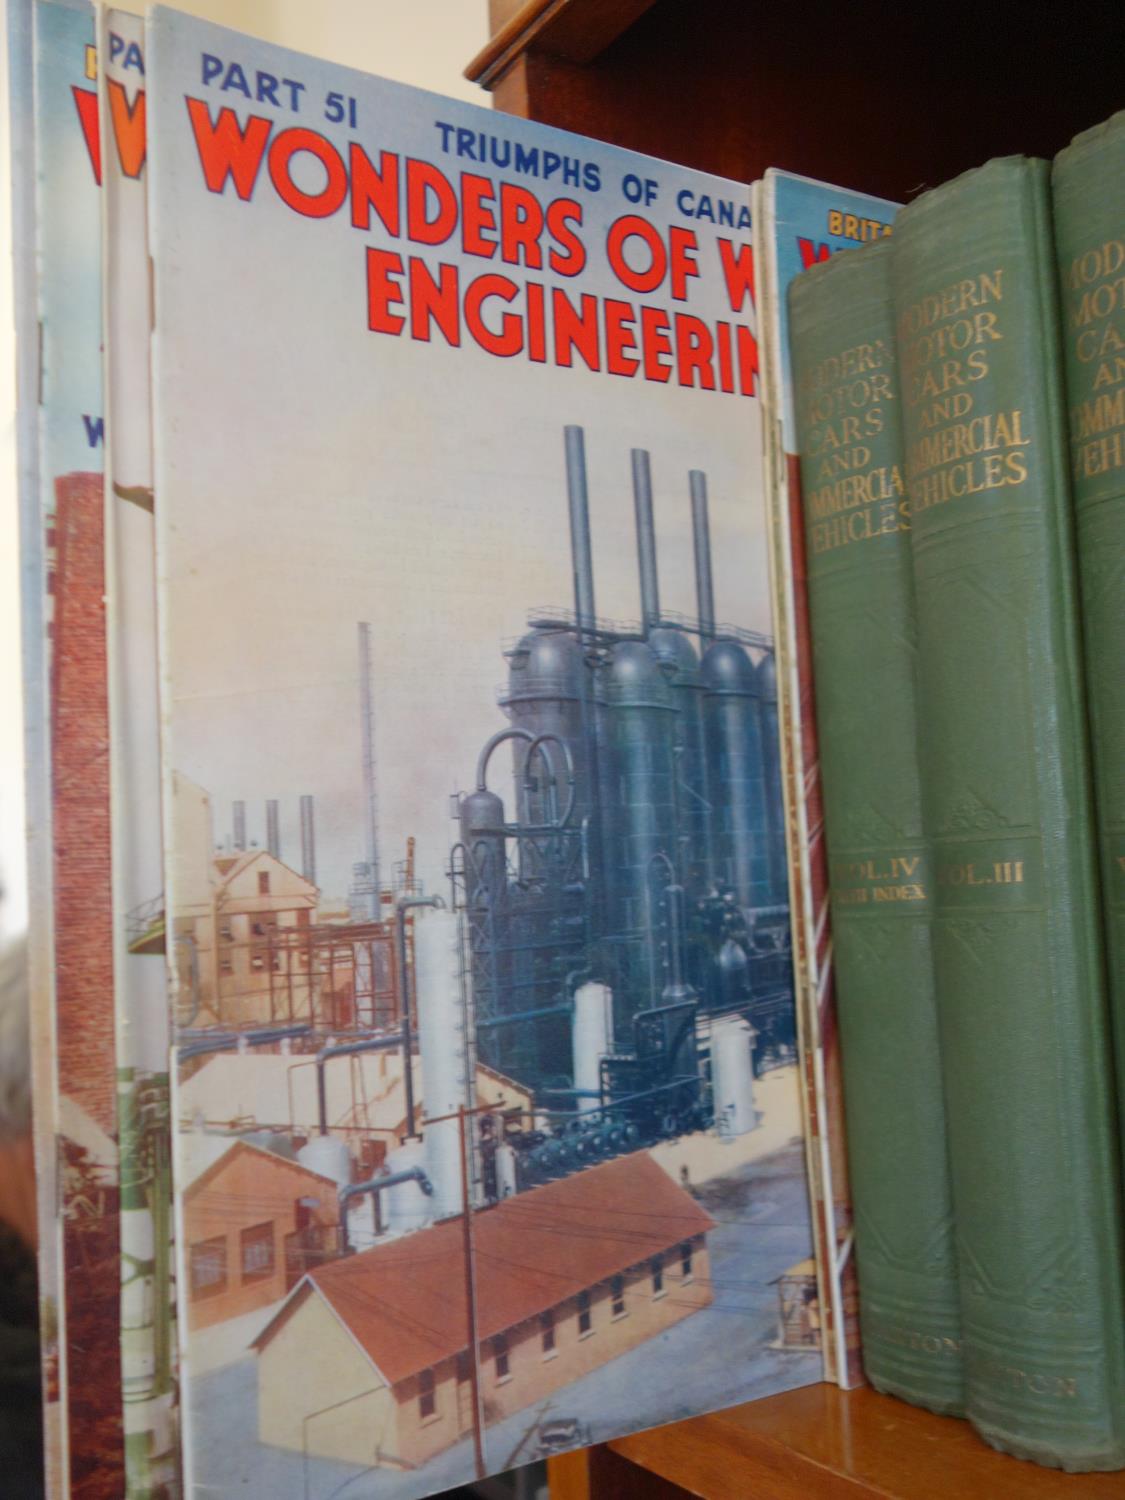 Modern Motorcars and commercial vehicles 4 x volumes, Wonders of the World Engineering magazines, - Image 3 of 4